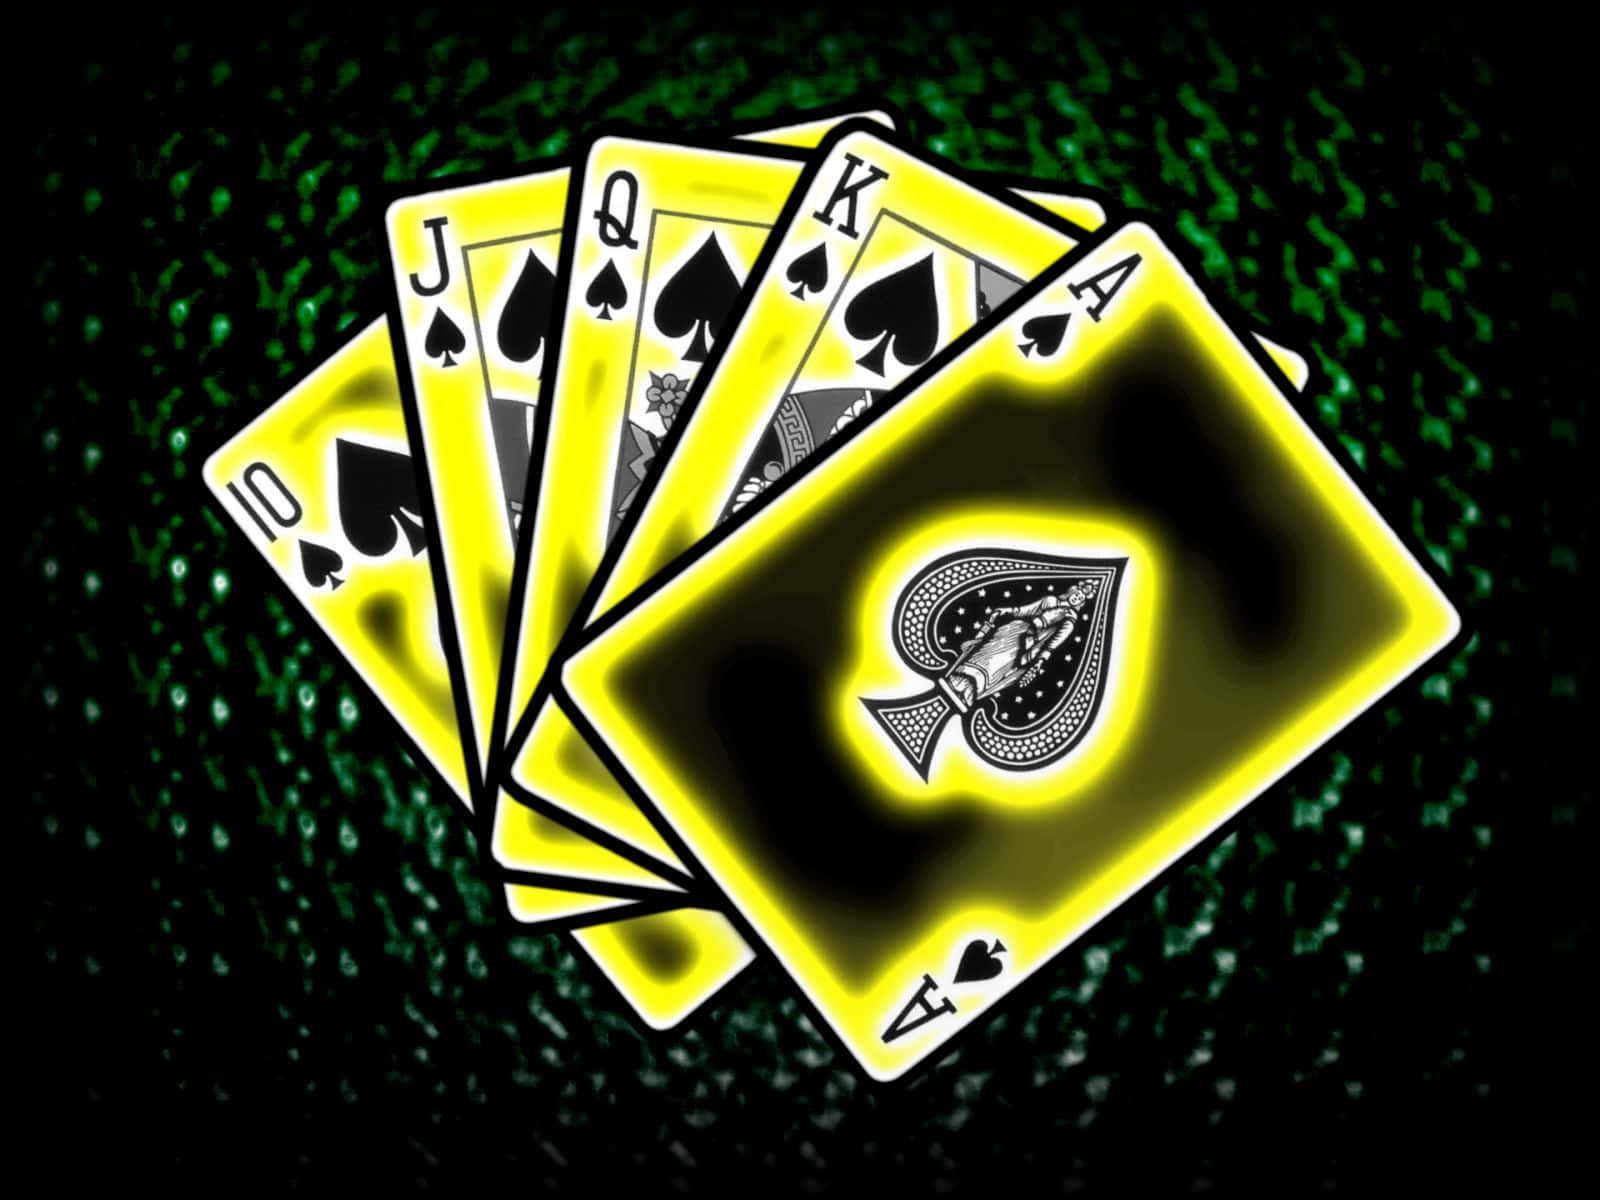 Download “A game of Poker is an exciting challenge full of potential  rewards!” | Wallpapers.com